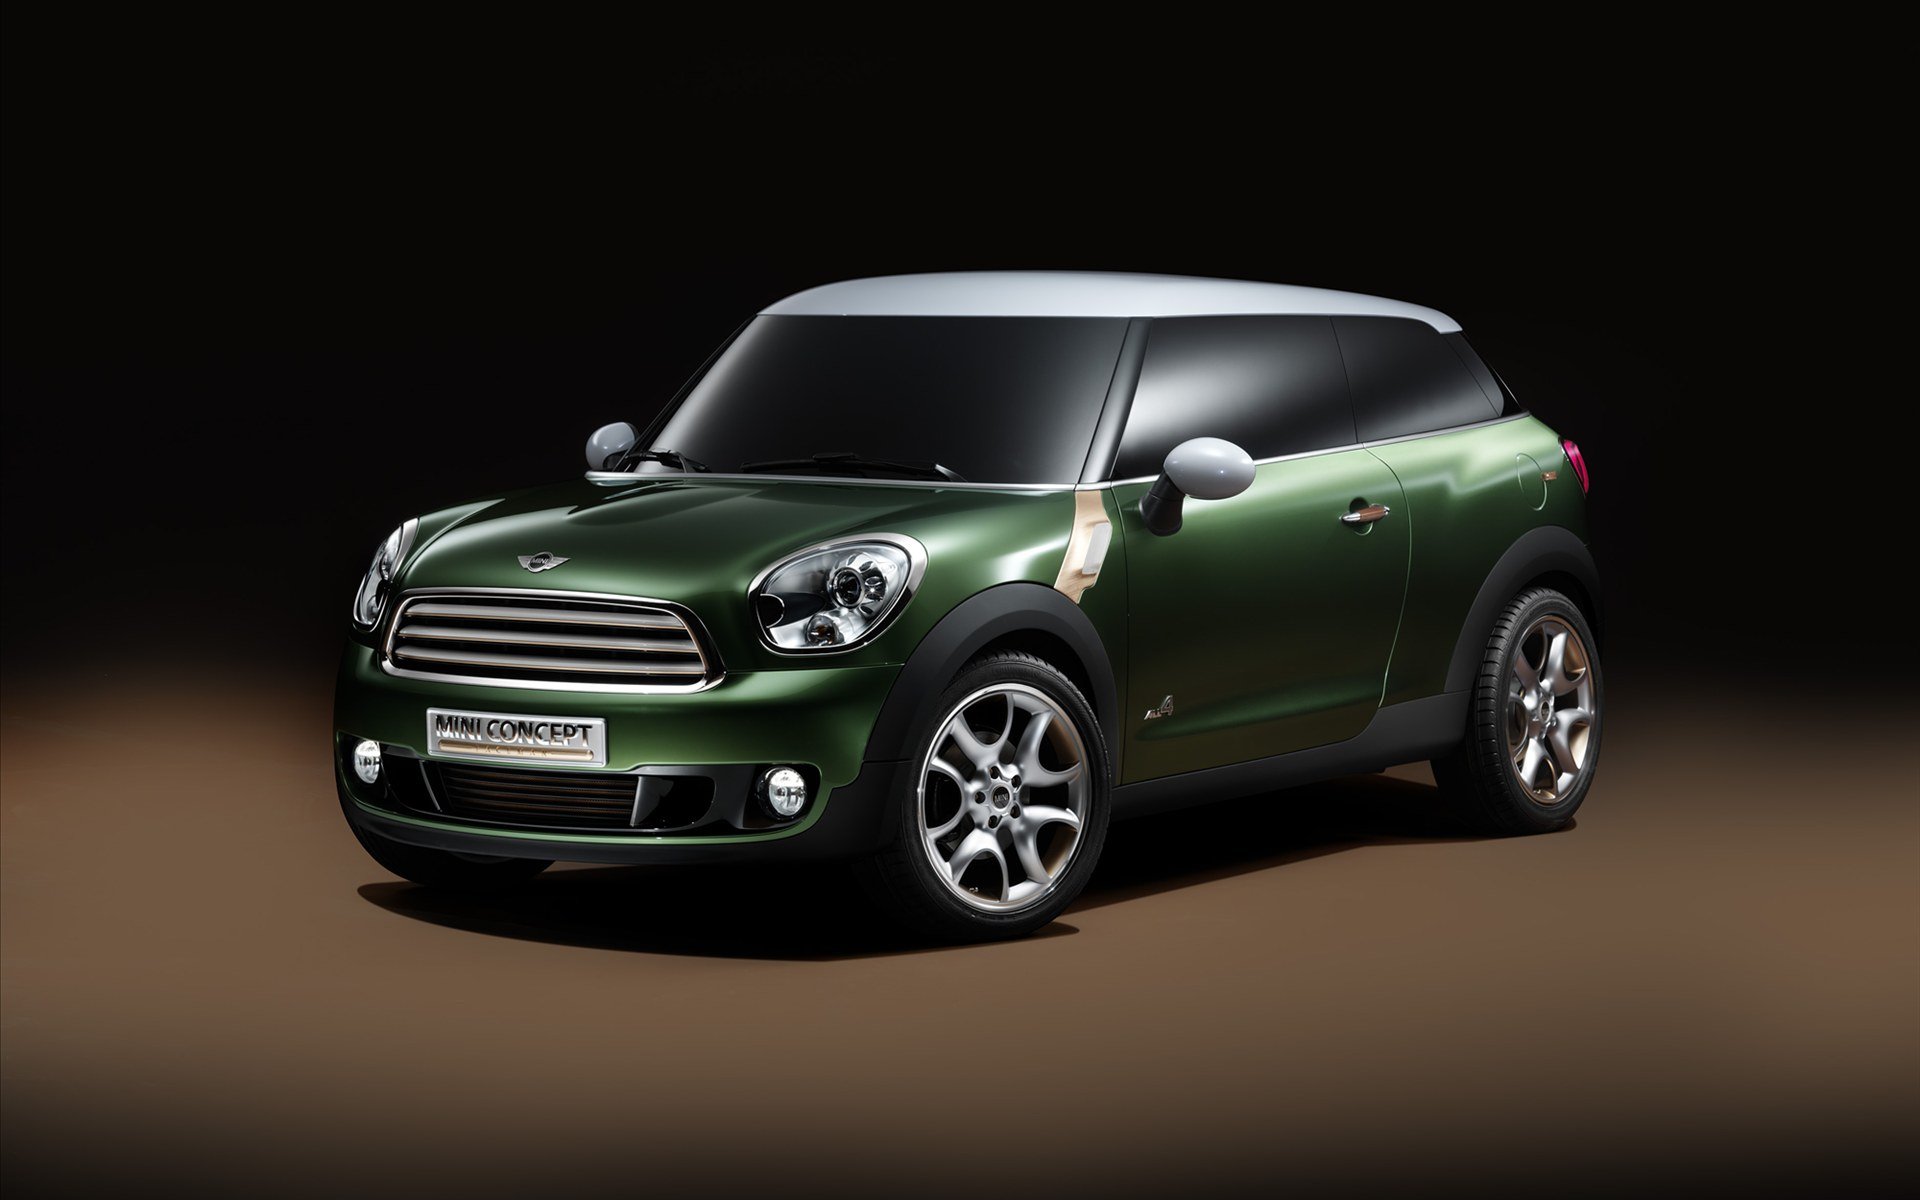 178 Mini Cooper Hd Wallpapers Background Images Wallpaper Abyss